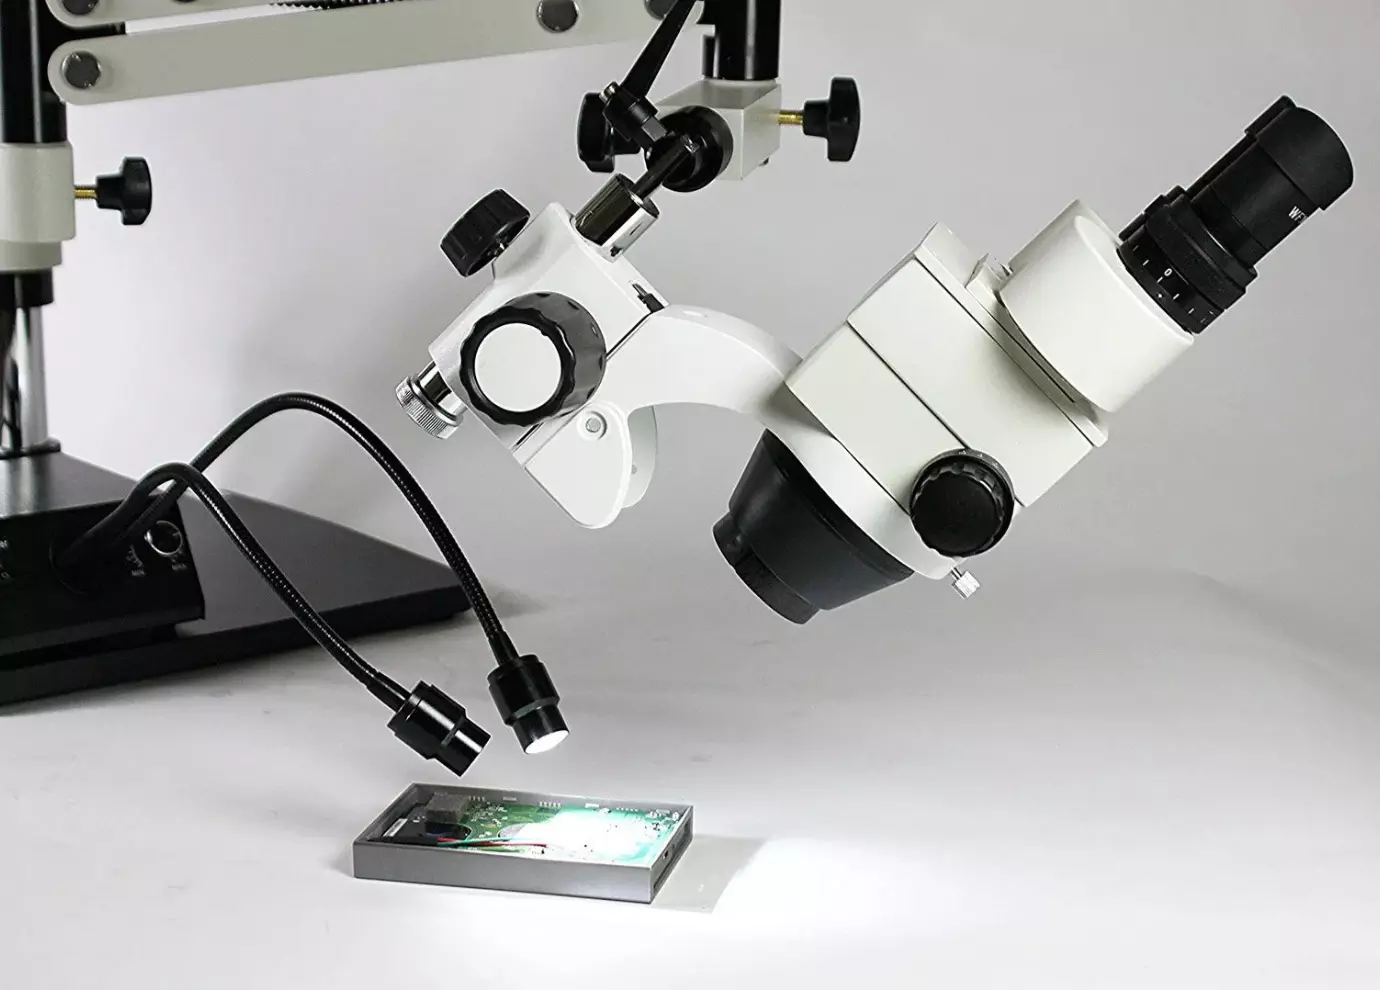 Stereo Zoom Microscope for Through Axis Observation